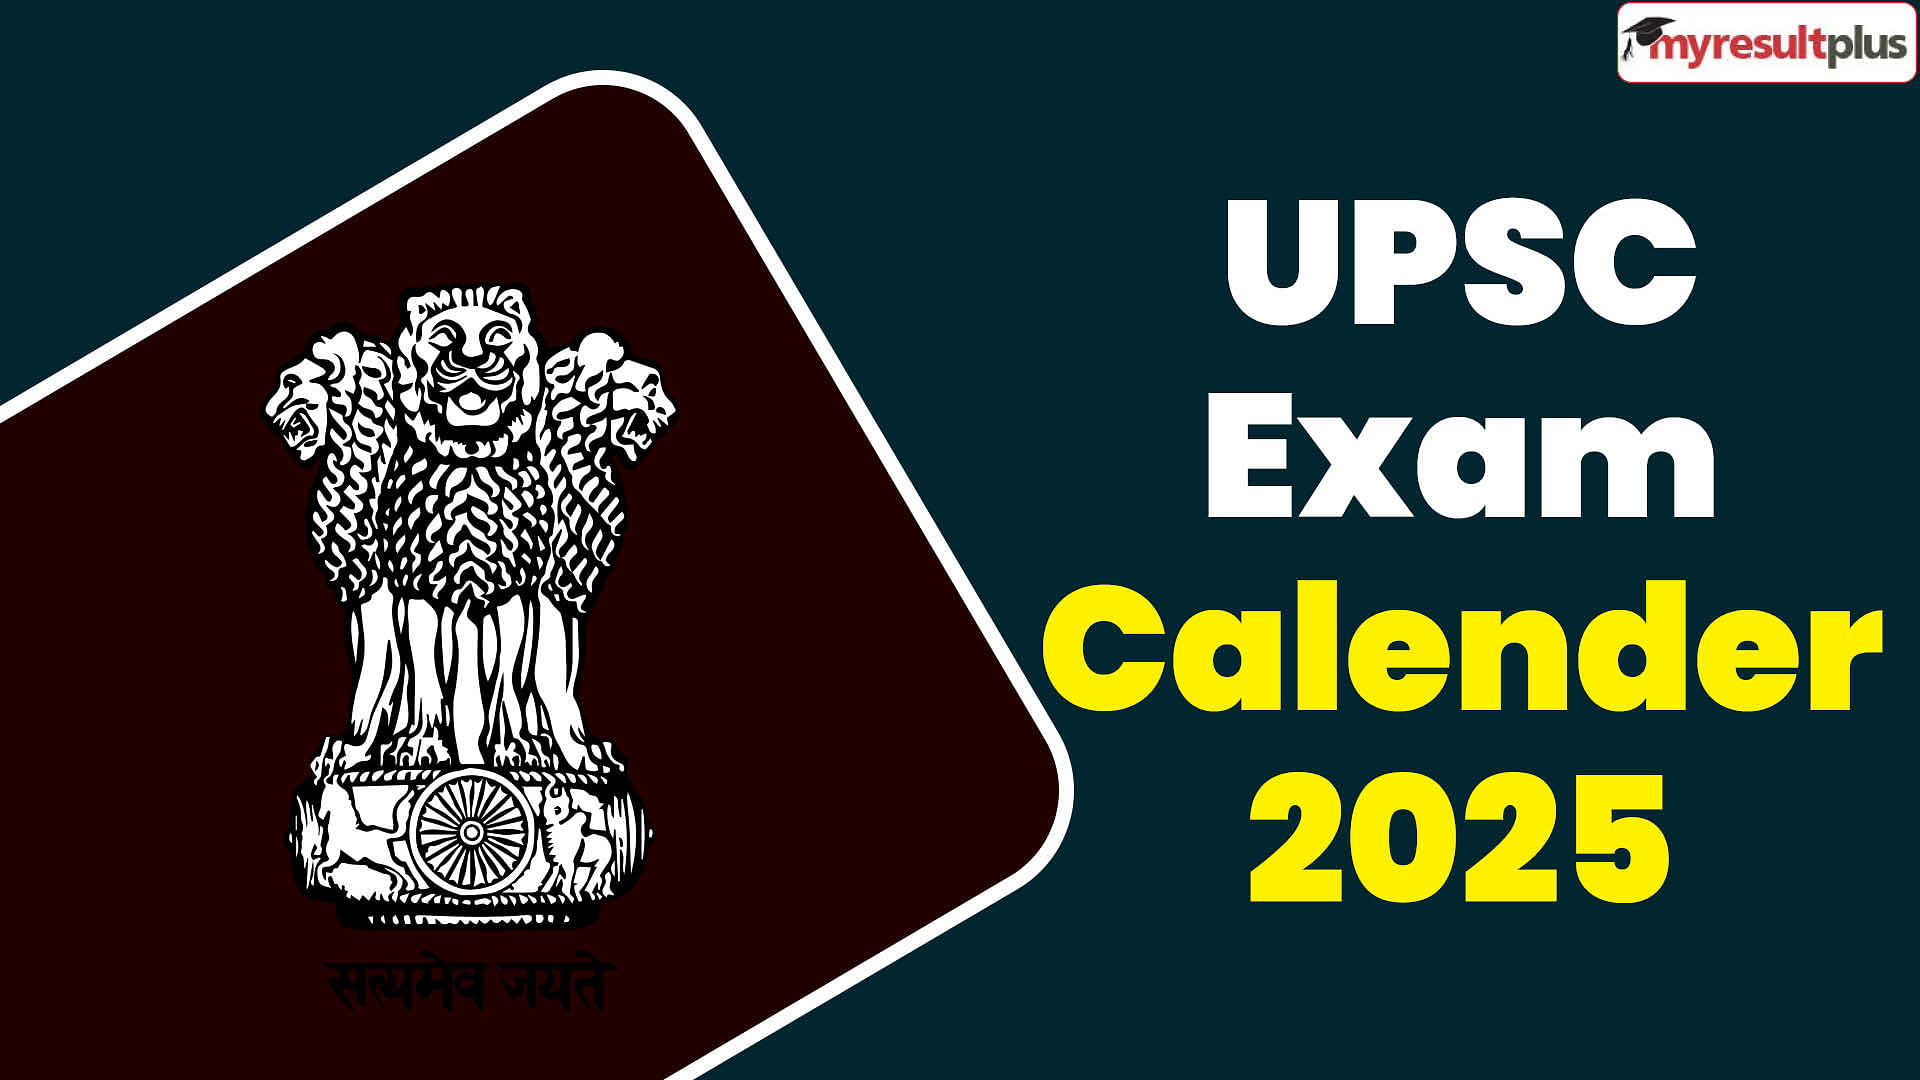 UPSC CSE prelims 2025 to be held on 25 May, Check complete UPSC examination schedule for next year here